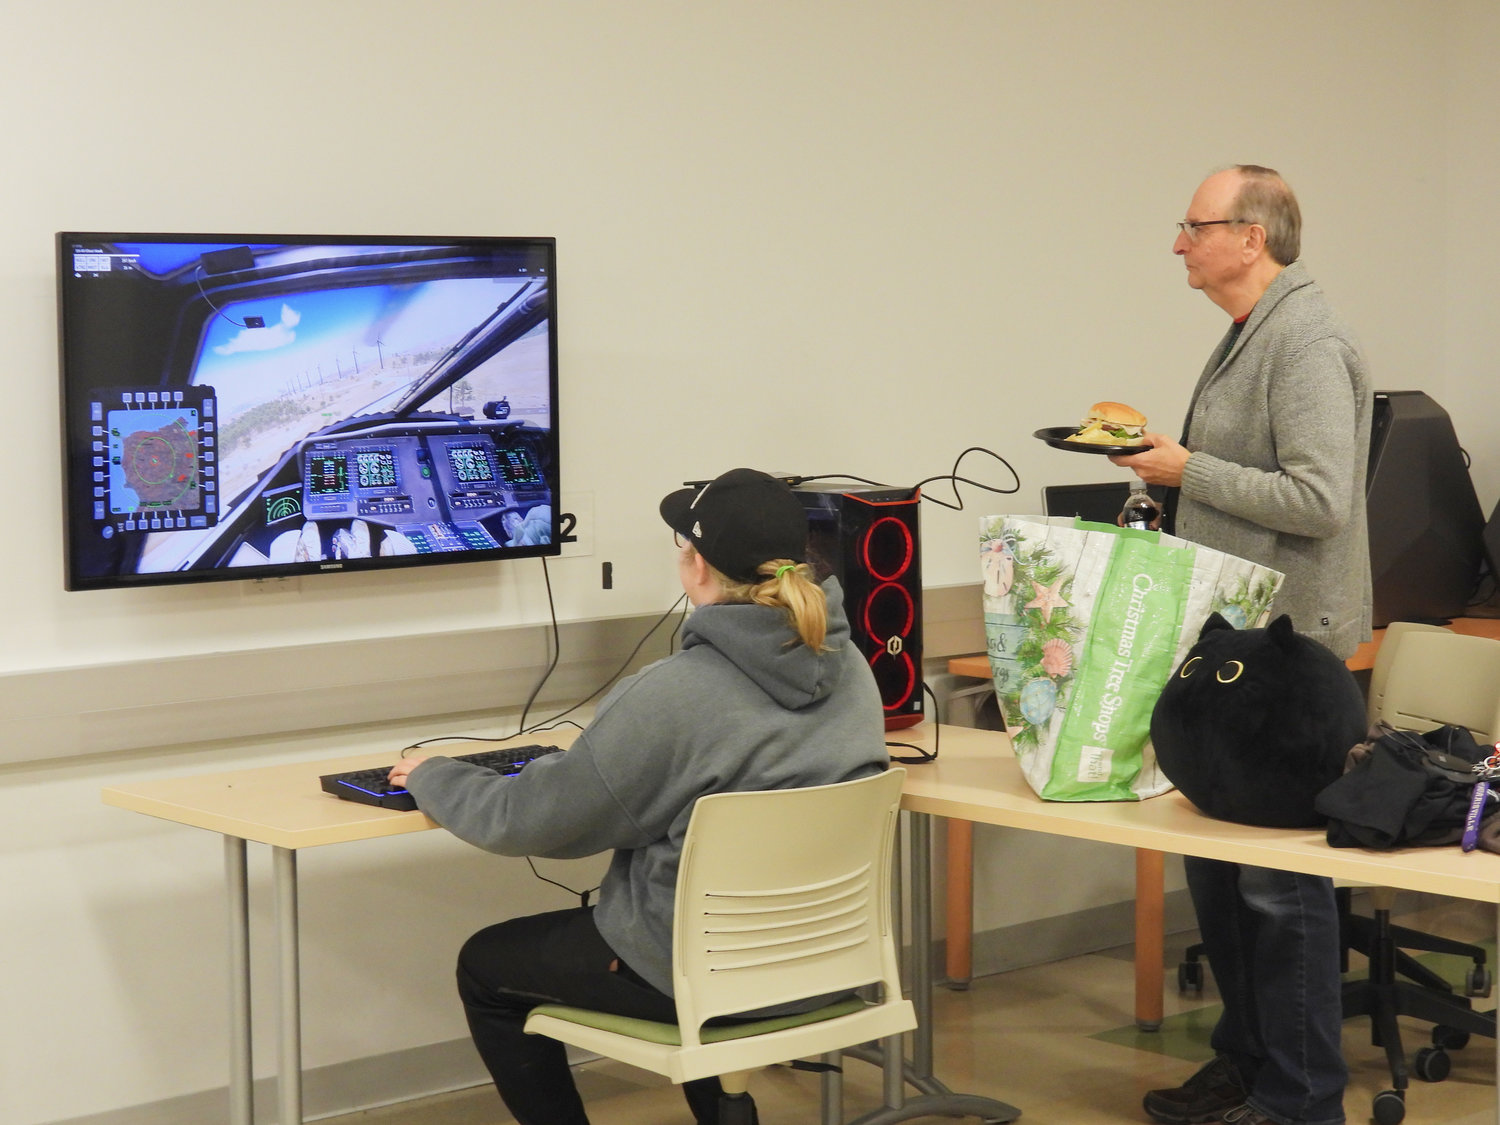 SUNY Morrisville Global Game Jam participant Grace Fowler, a freshman, takes a small break during lunch to show Professor Richard Marcoux one of her games at the Game Jam.